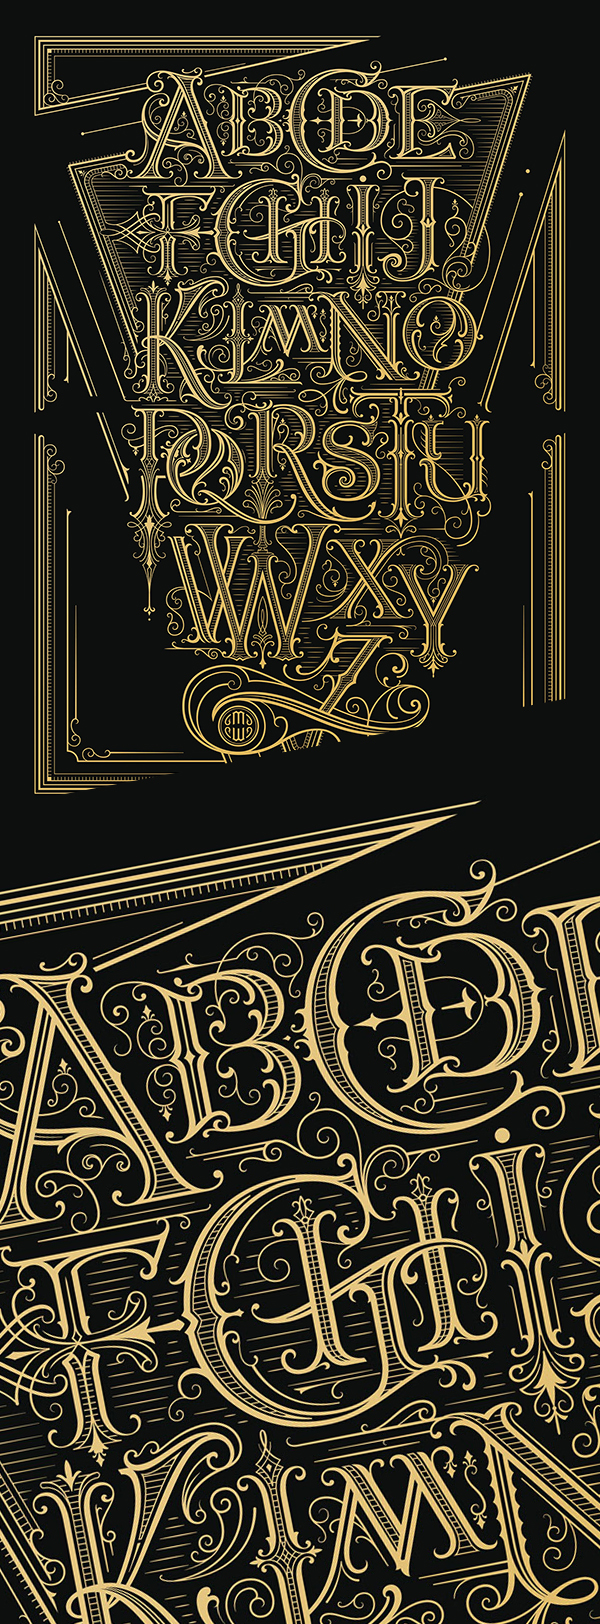  A to Z: The Alphabet Typography